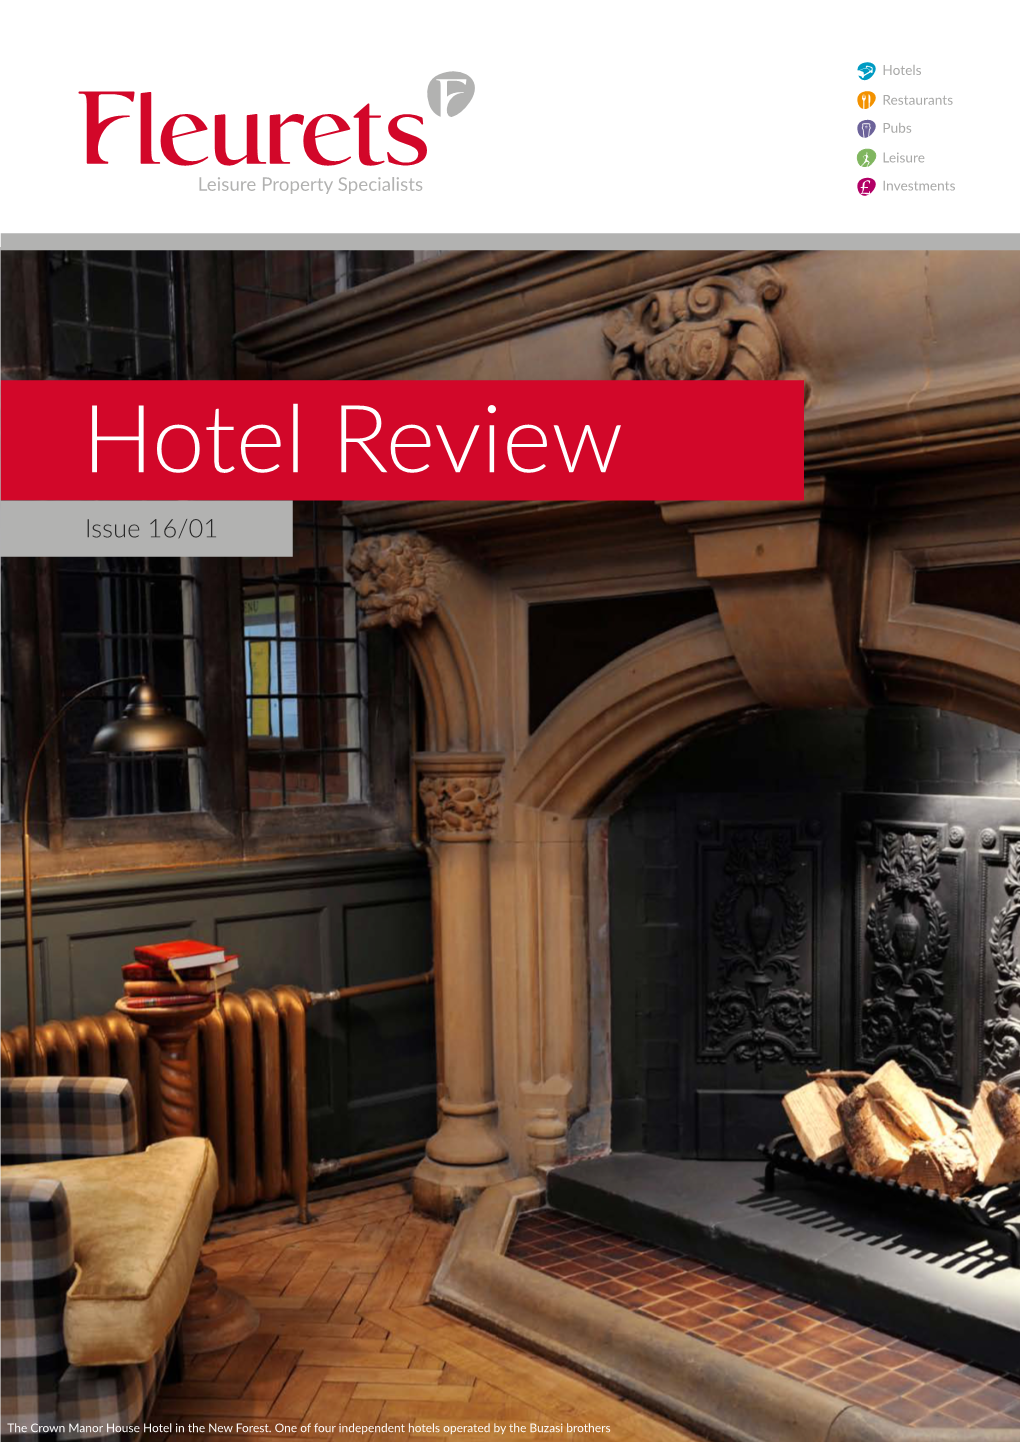 Hotel Review Issue 16/01